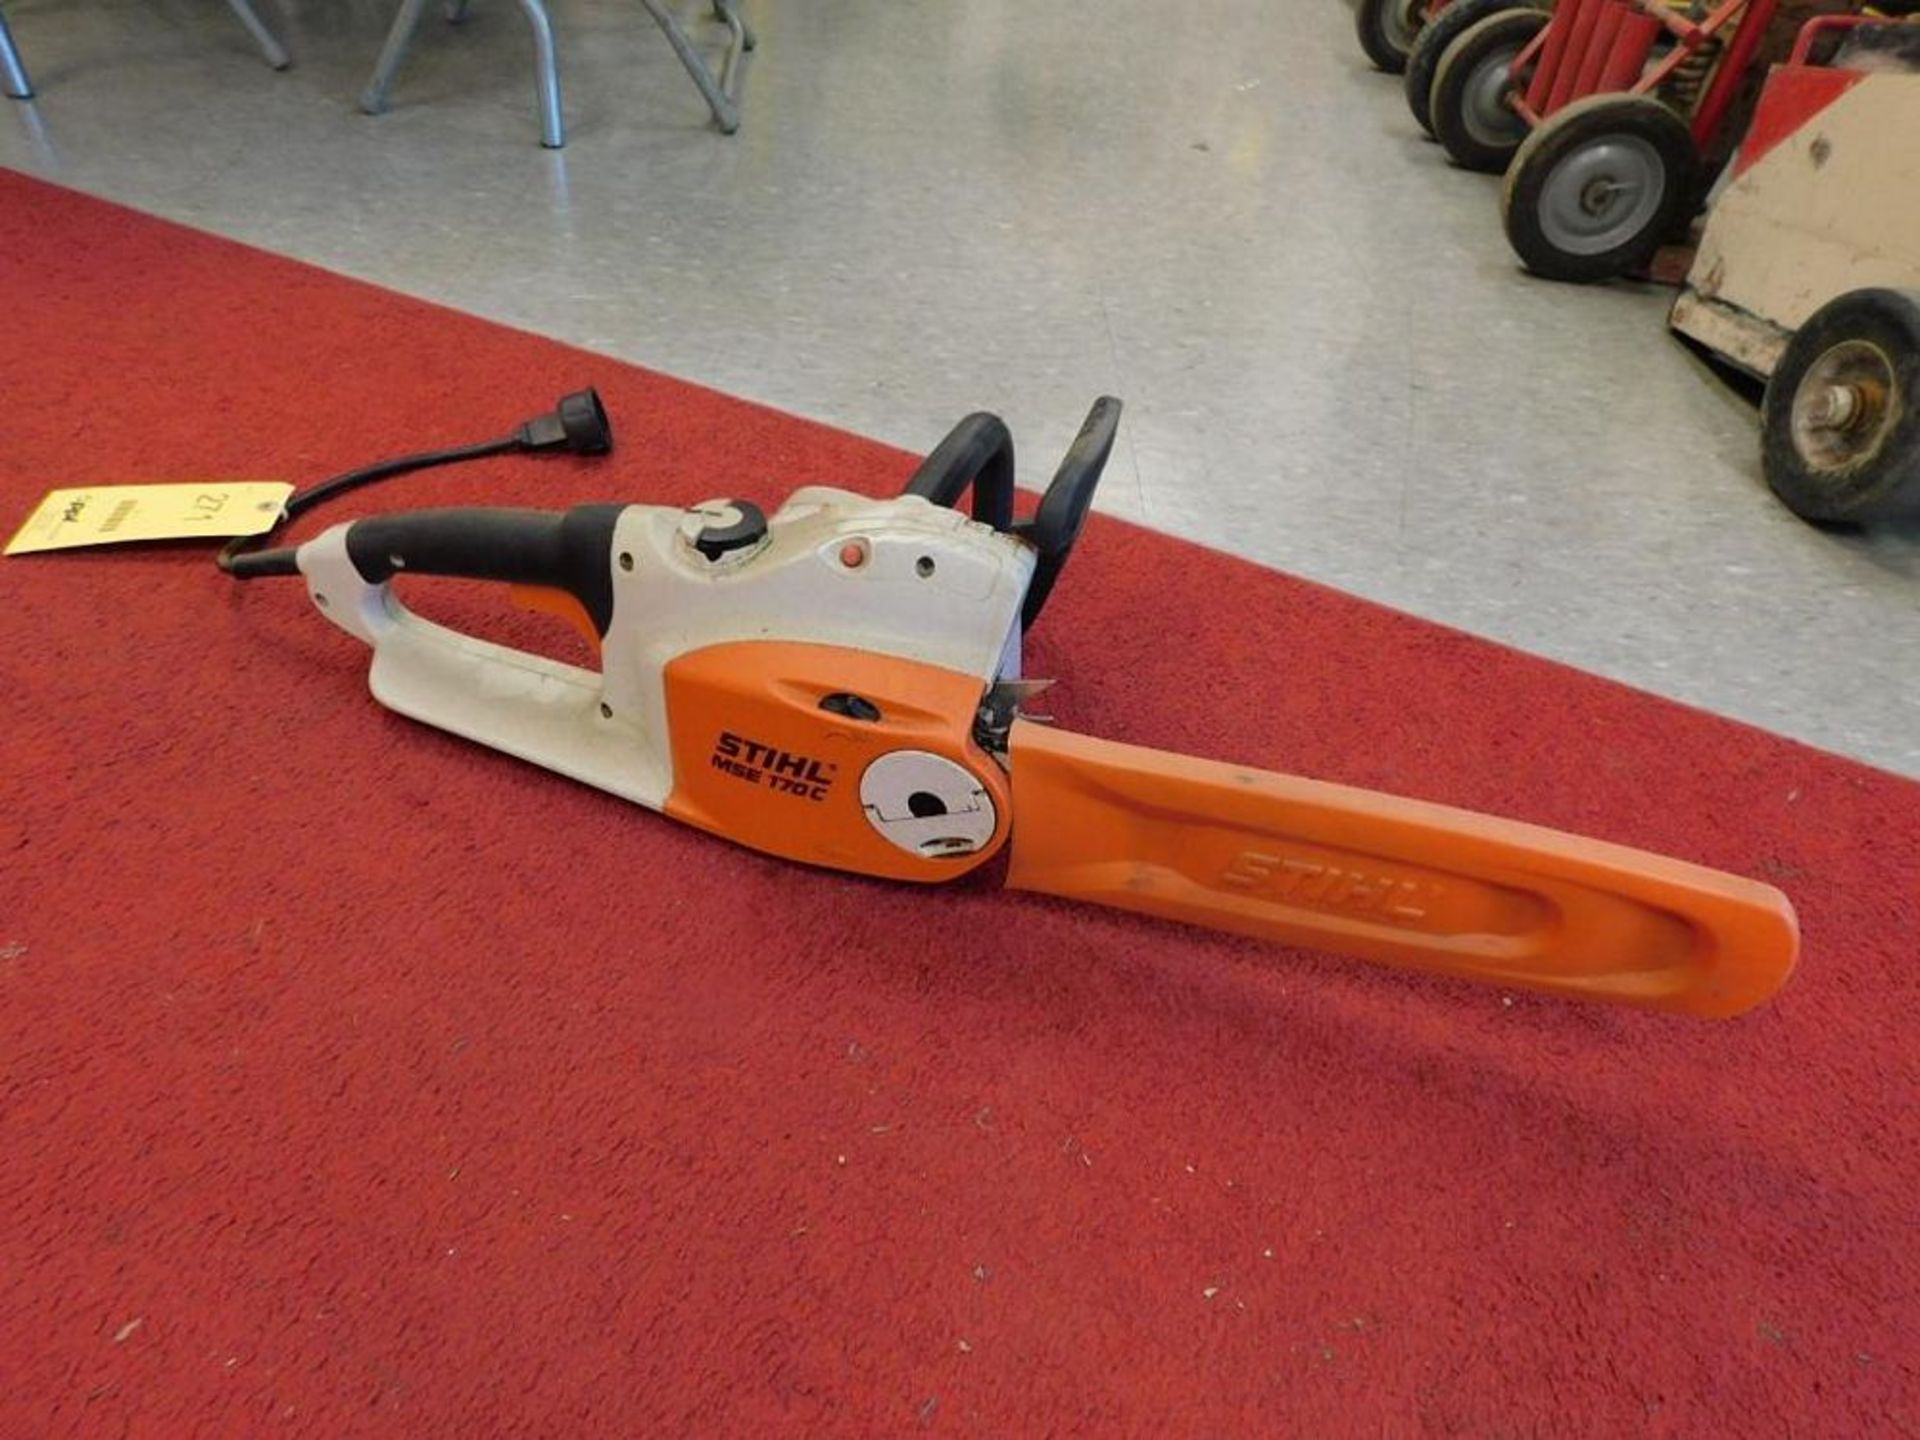 Stihl MSE 170C Electric Chain Saw (LOCATION: 318 N. Milwaukee Ave., Wheeling, IL 60090)